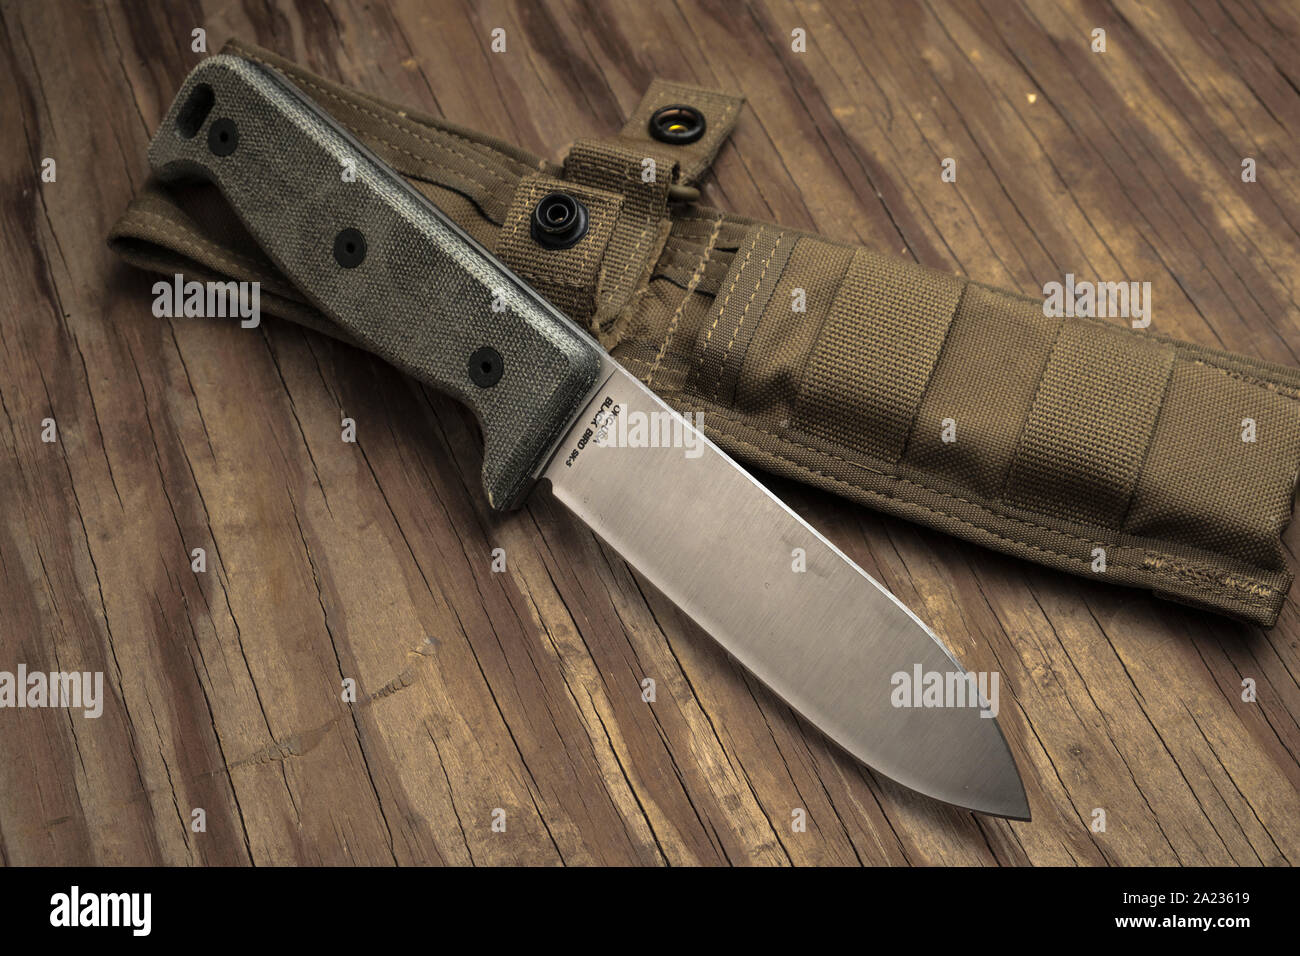 Heavy blade survival knife and carrying sheath. Stock Photo